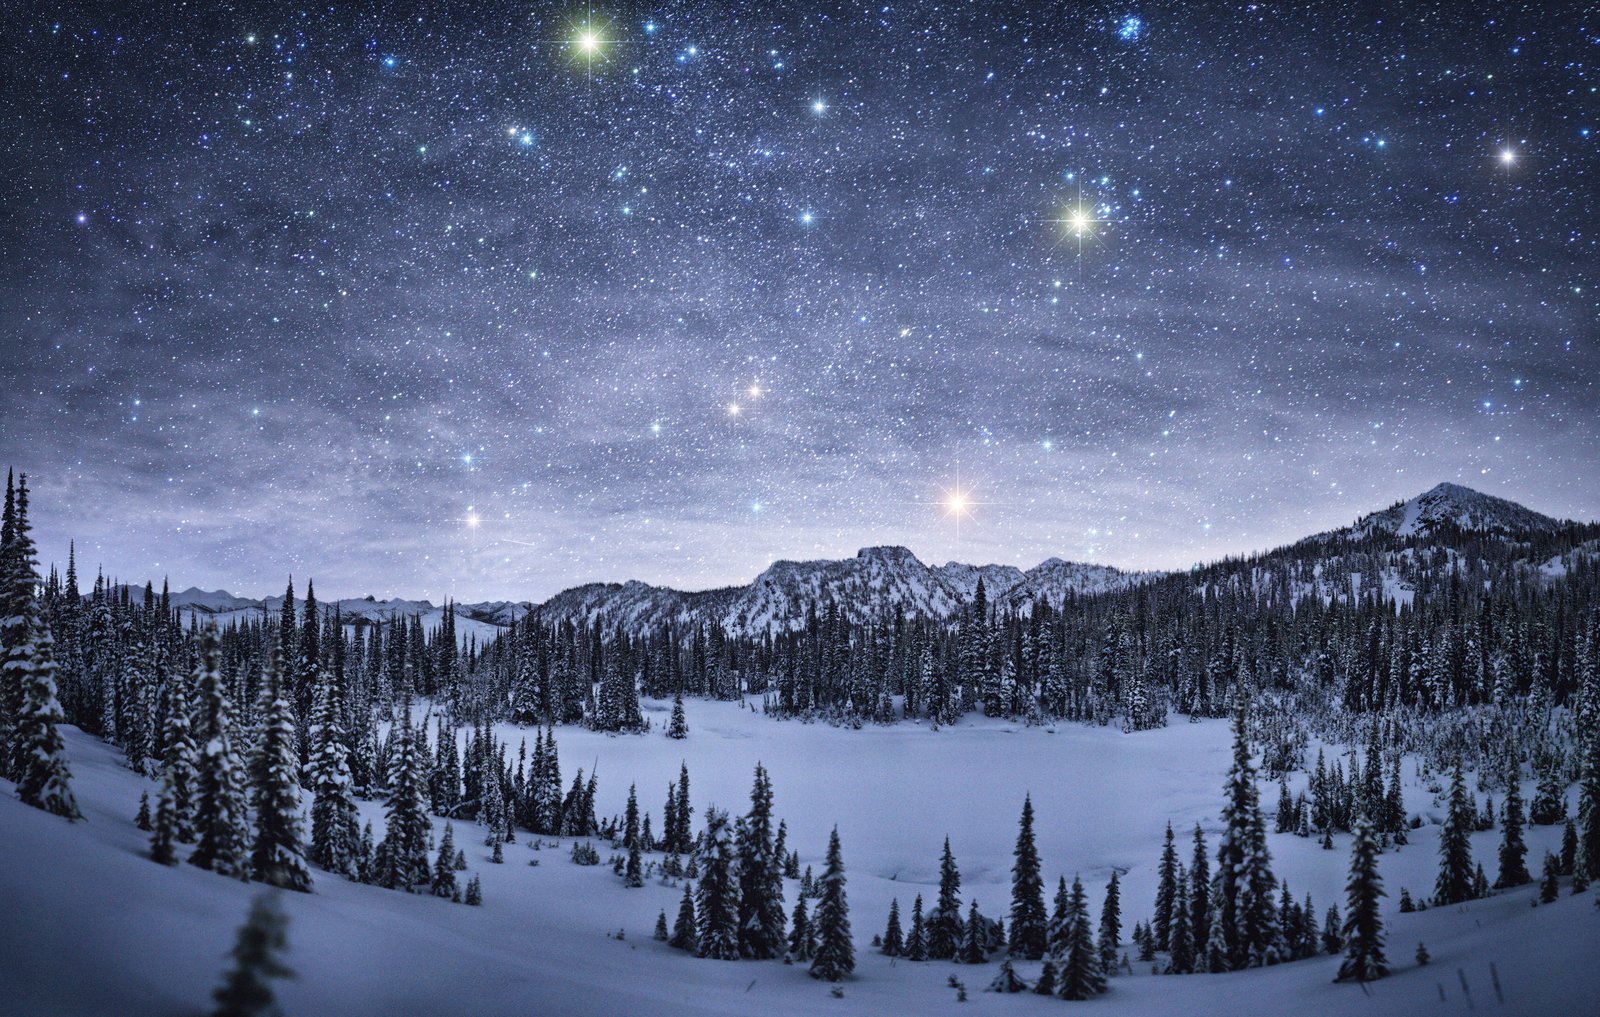 Starry Night over Winter Landscape Wallpaper and Background Image 1600x1017 ID770912